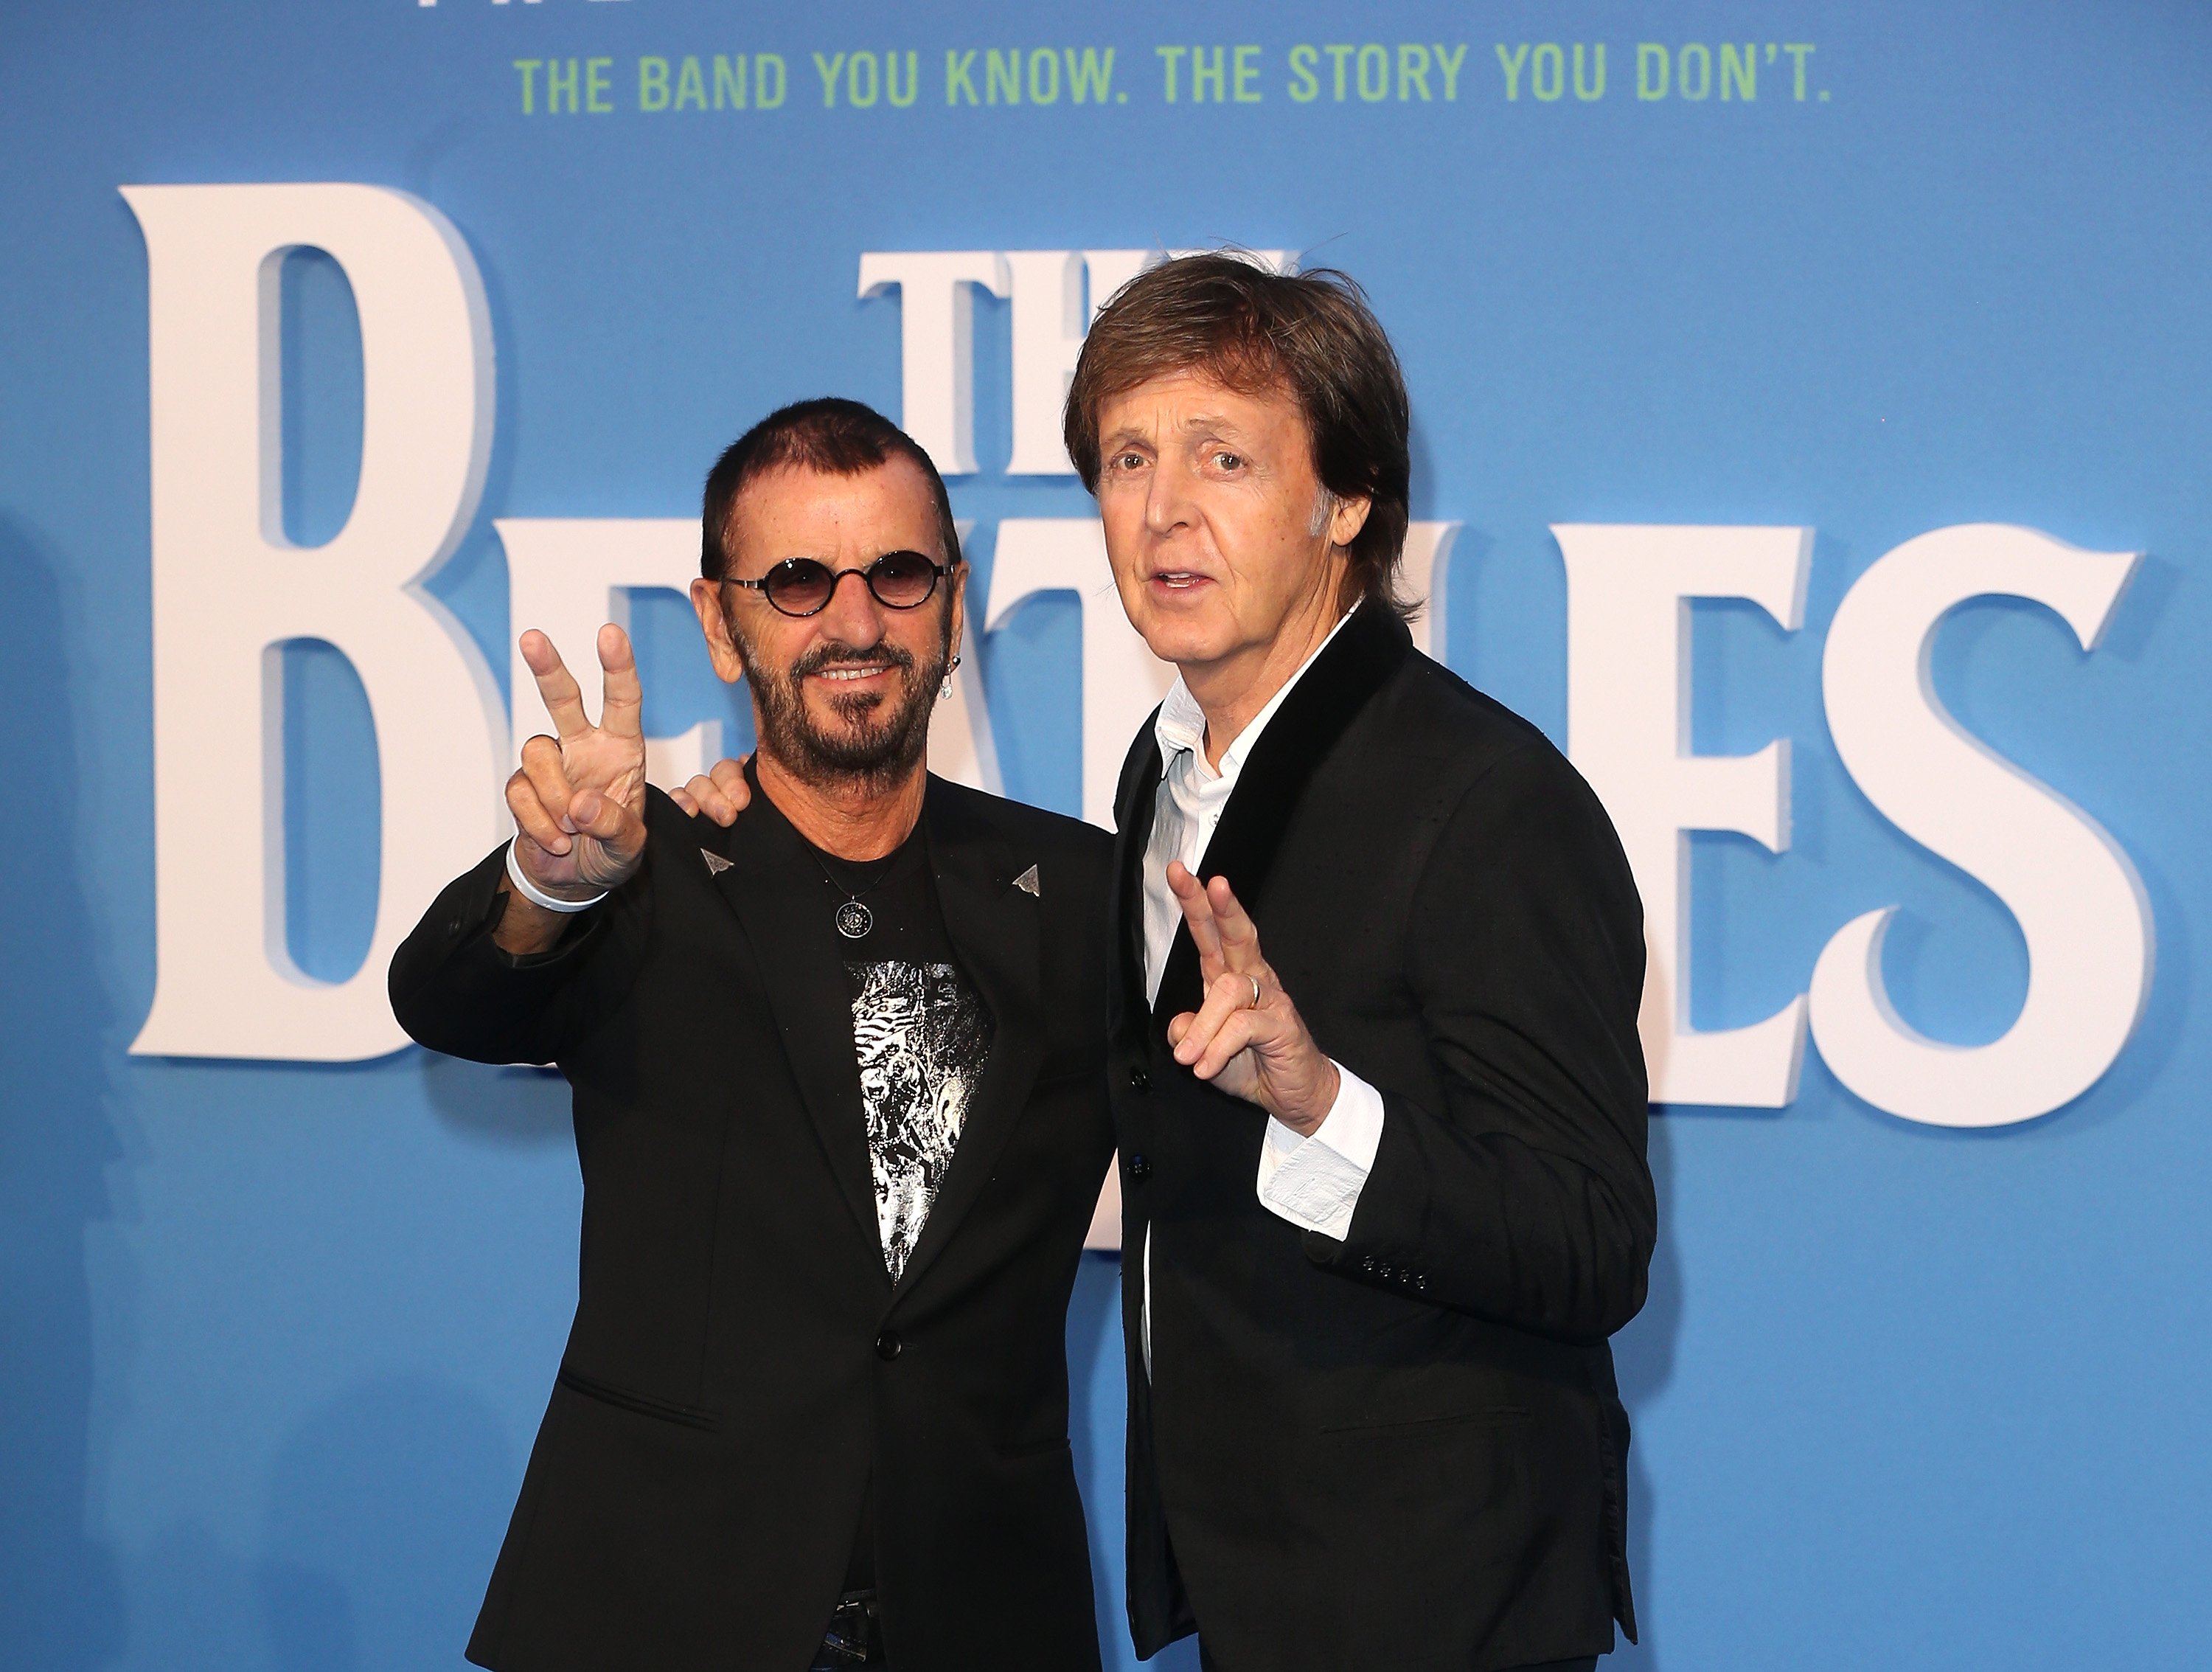 Ringo Starr and Sir Paul McCartney arrive for the World premiere of 'The Beatles: Eight Days A Week - The Touring Years'